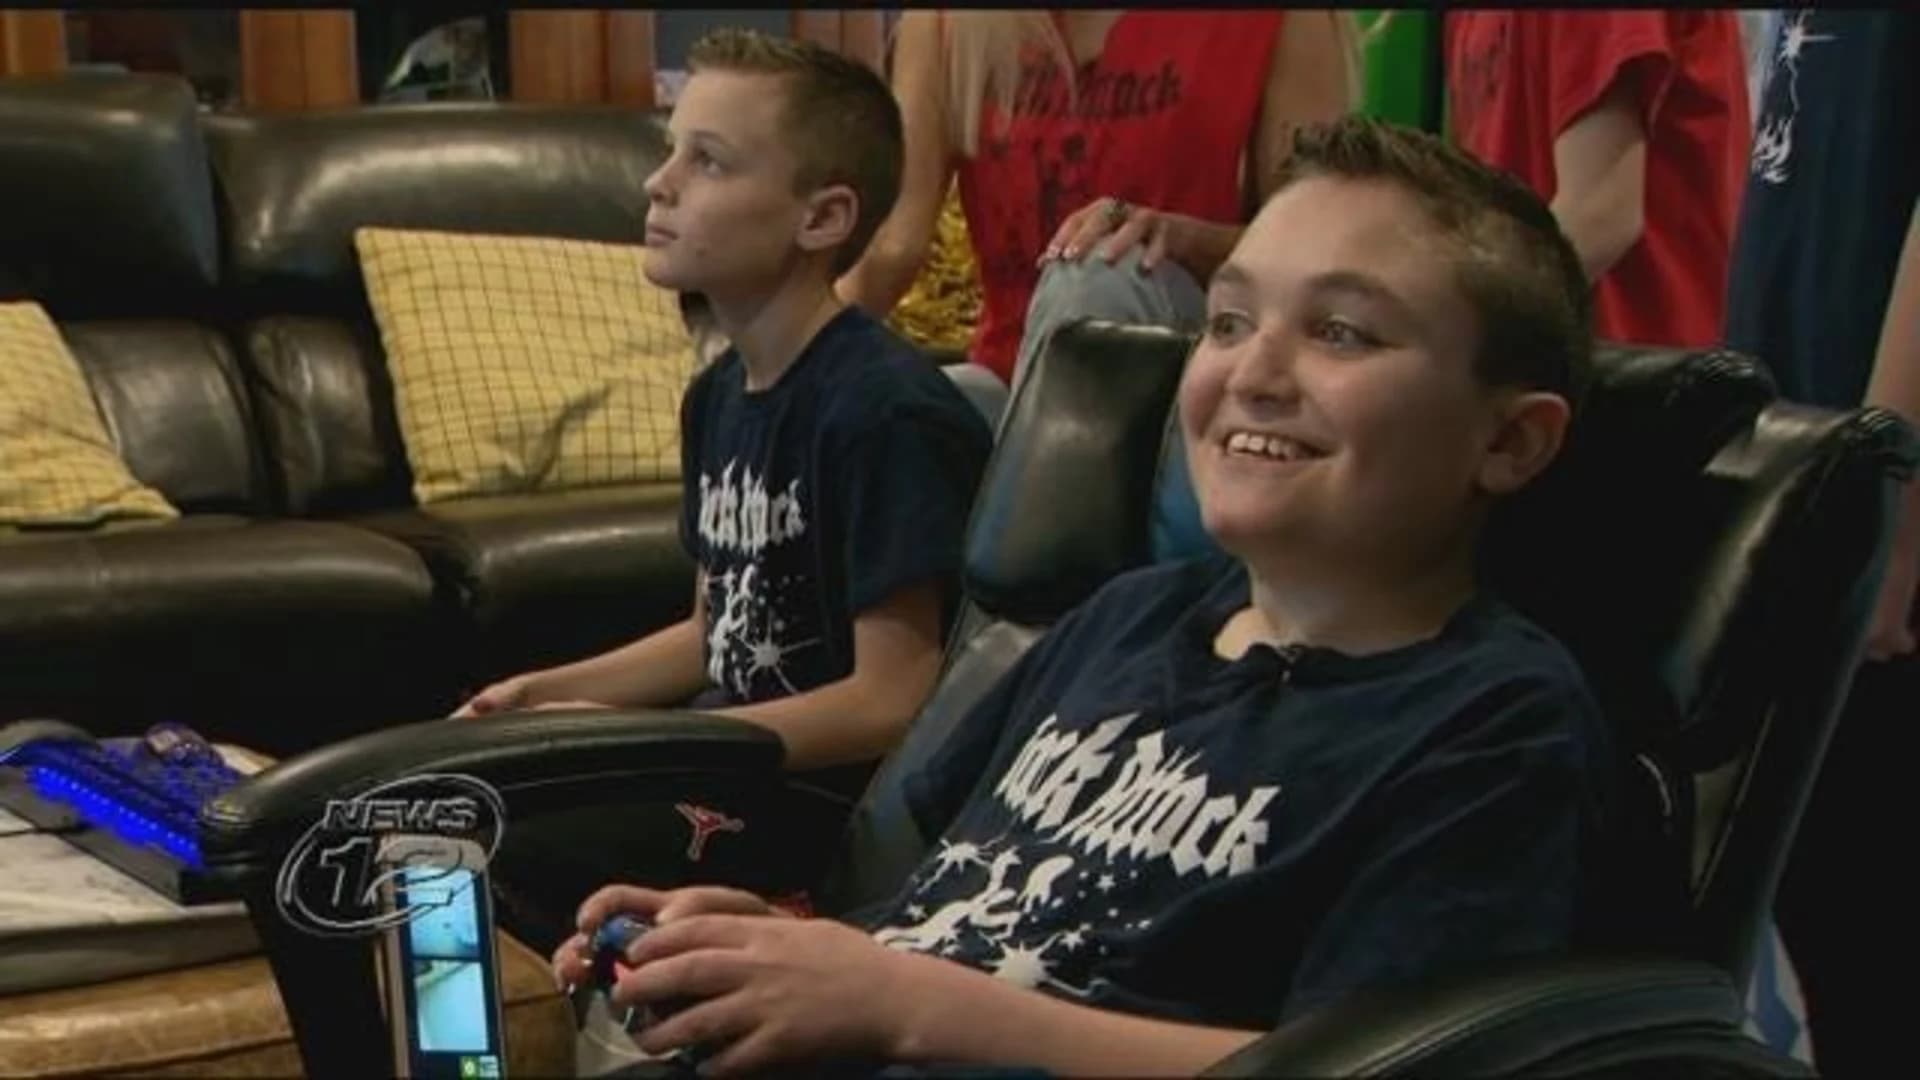 'Fortnite' offers new opportunities for teen with rare condition